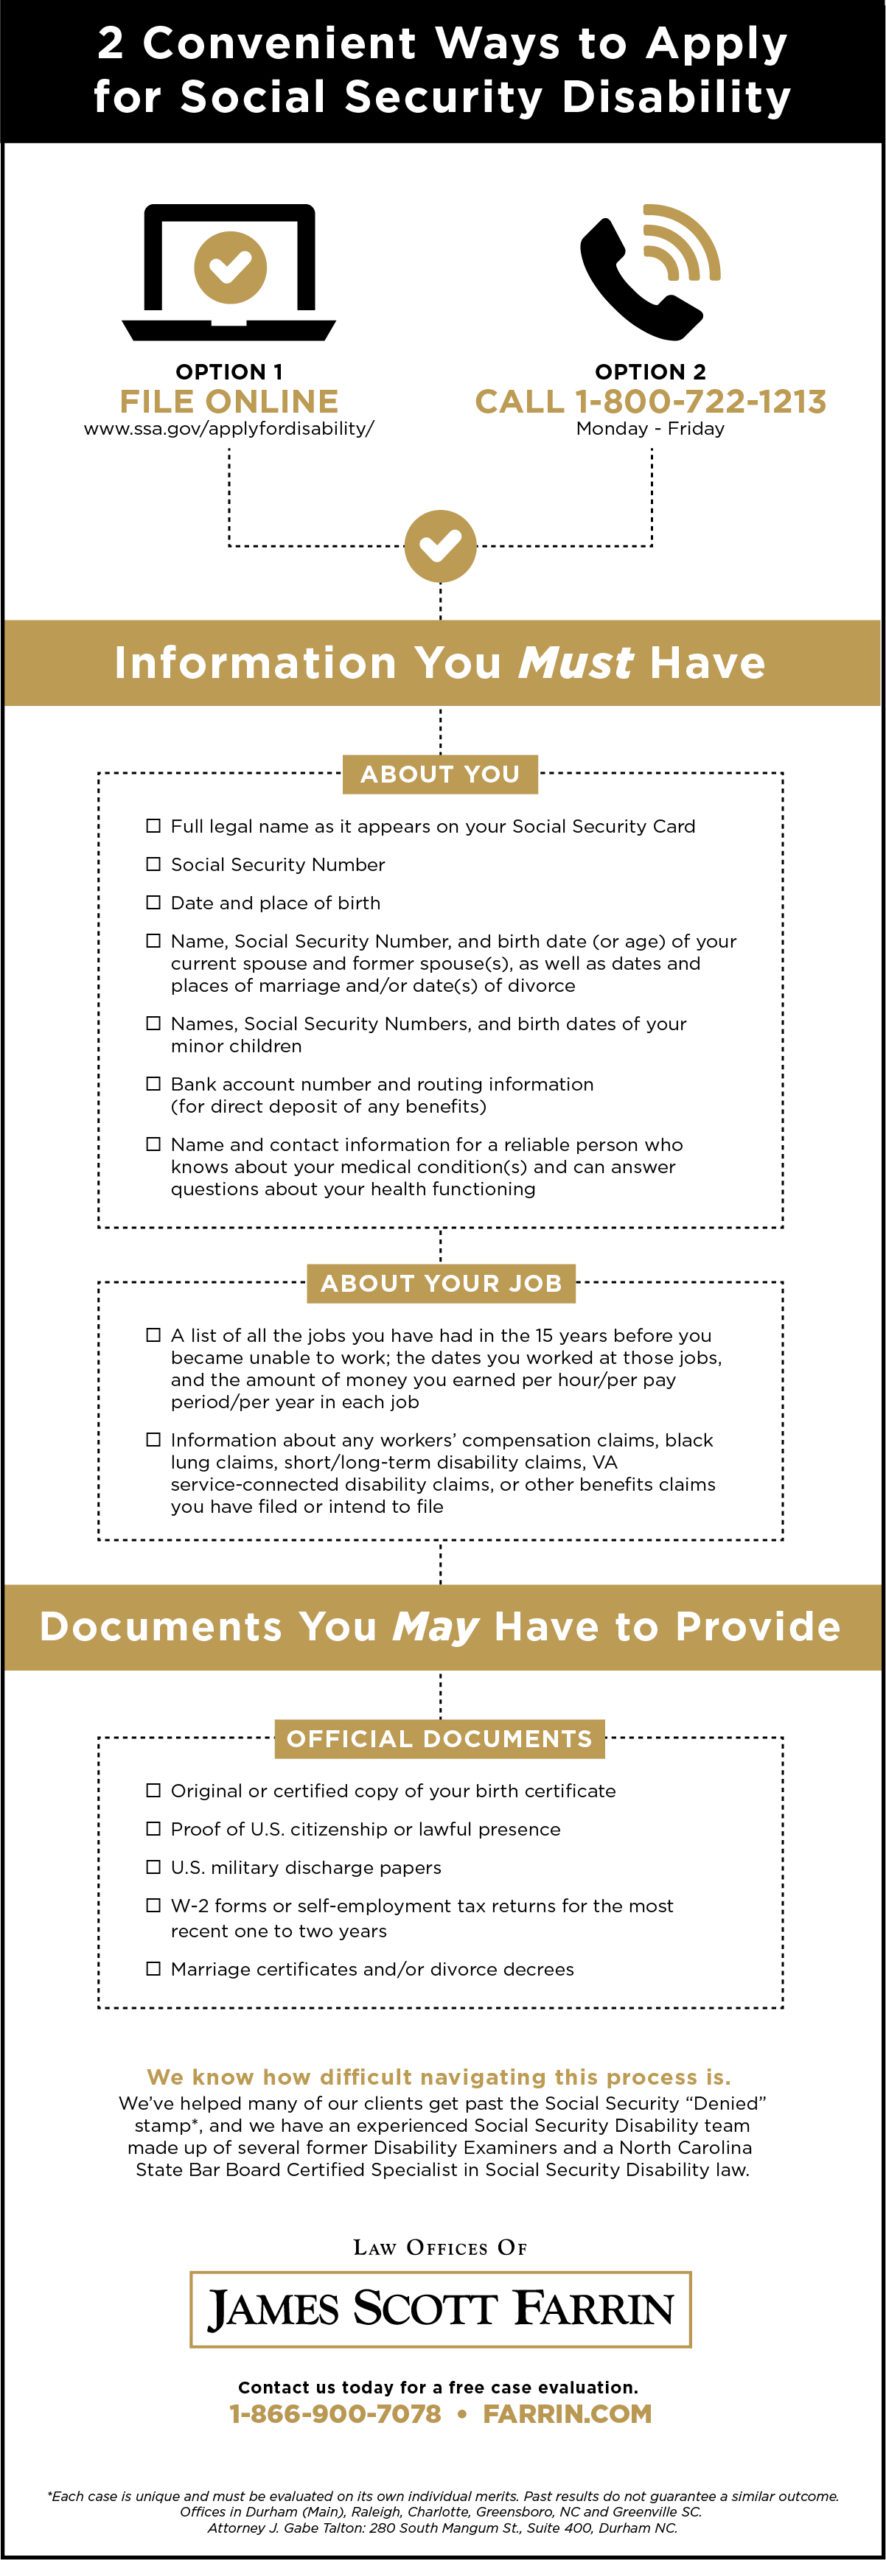 Once you have official documents ready, two ways to apply for disability in NC are filing online & calling 1-800-722-1213. 